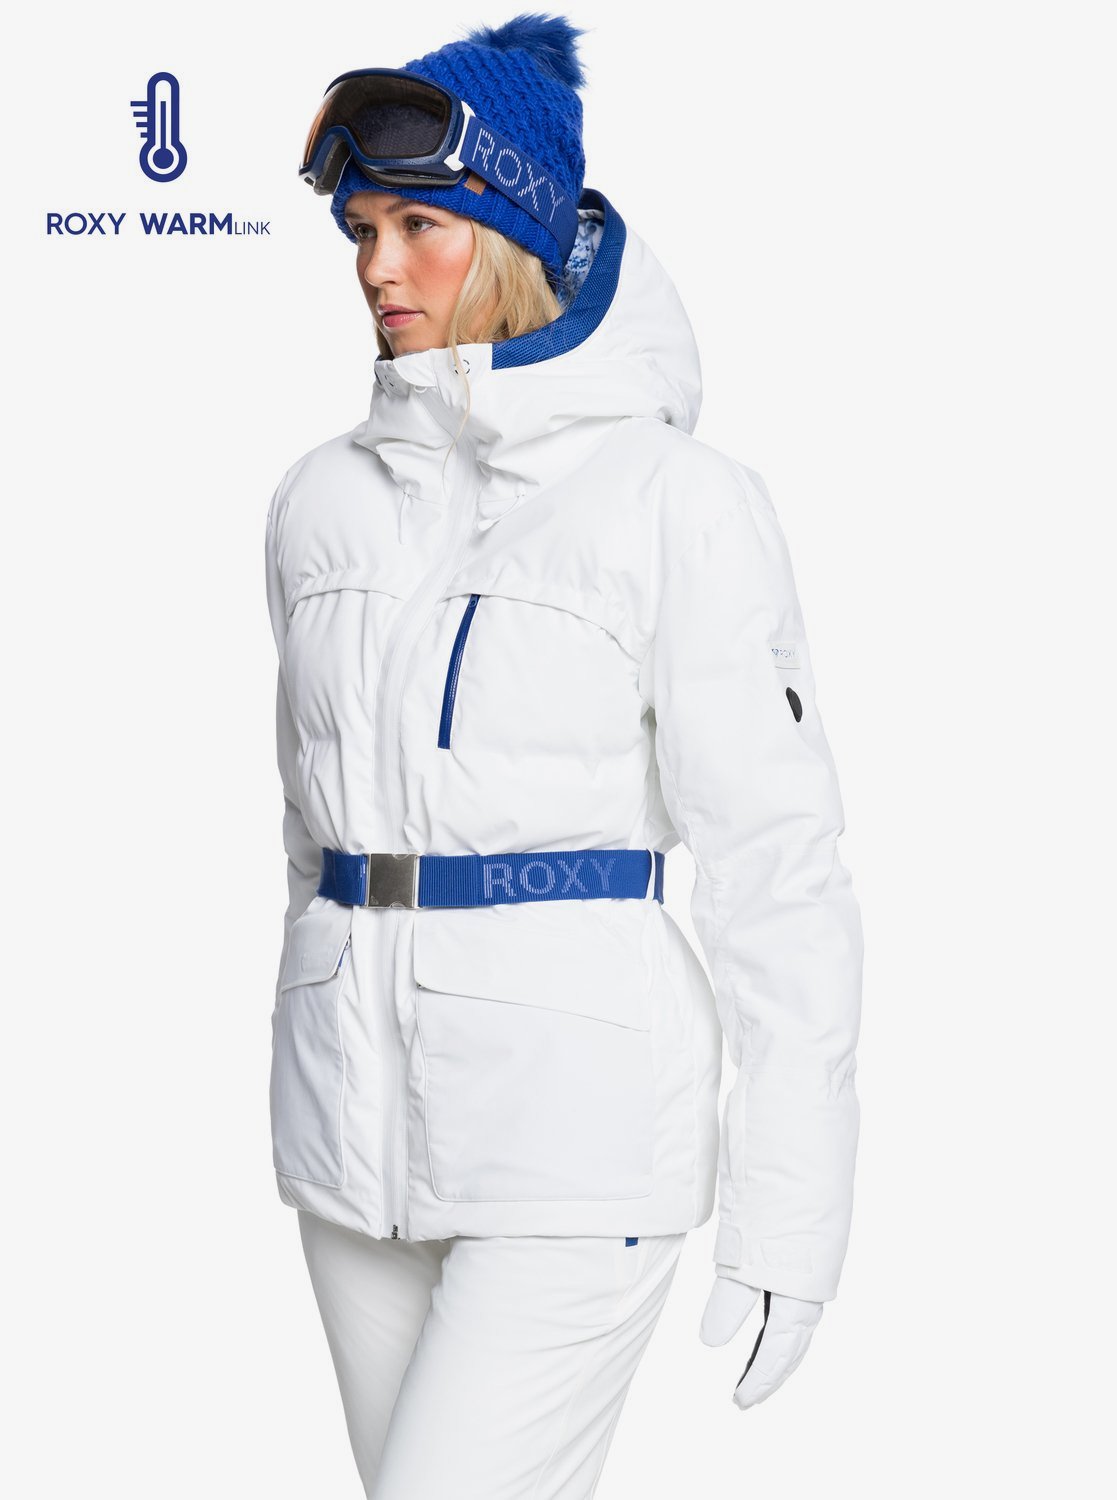 Roxy Women's Premire Snow Jacket White Modeled Angled Side View